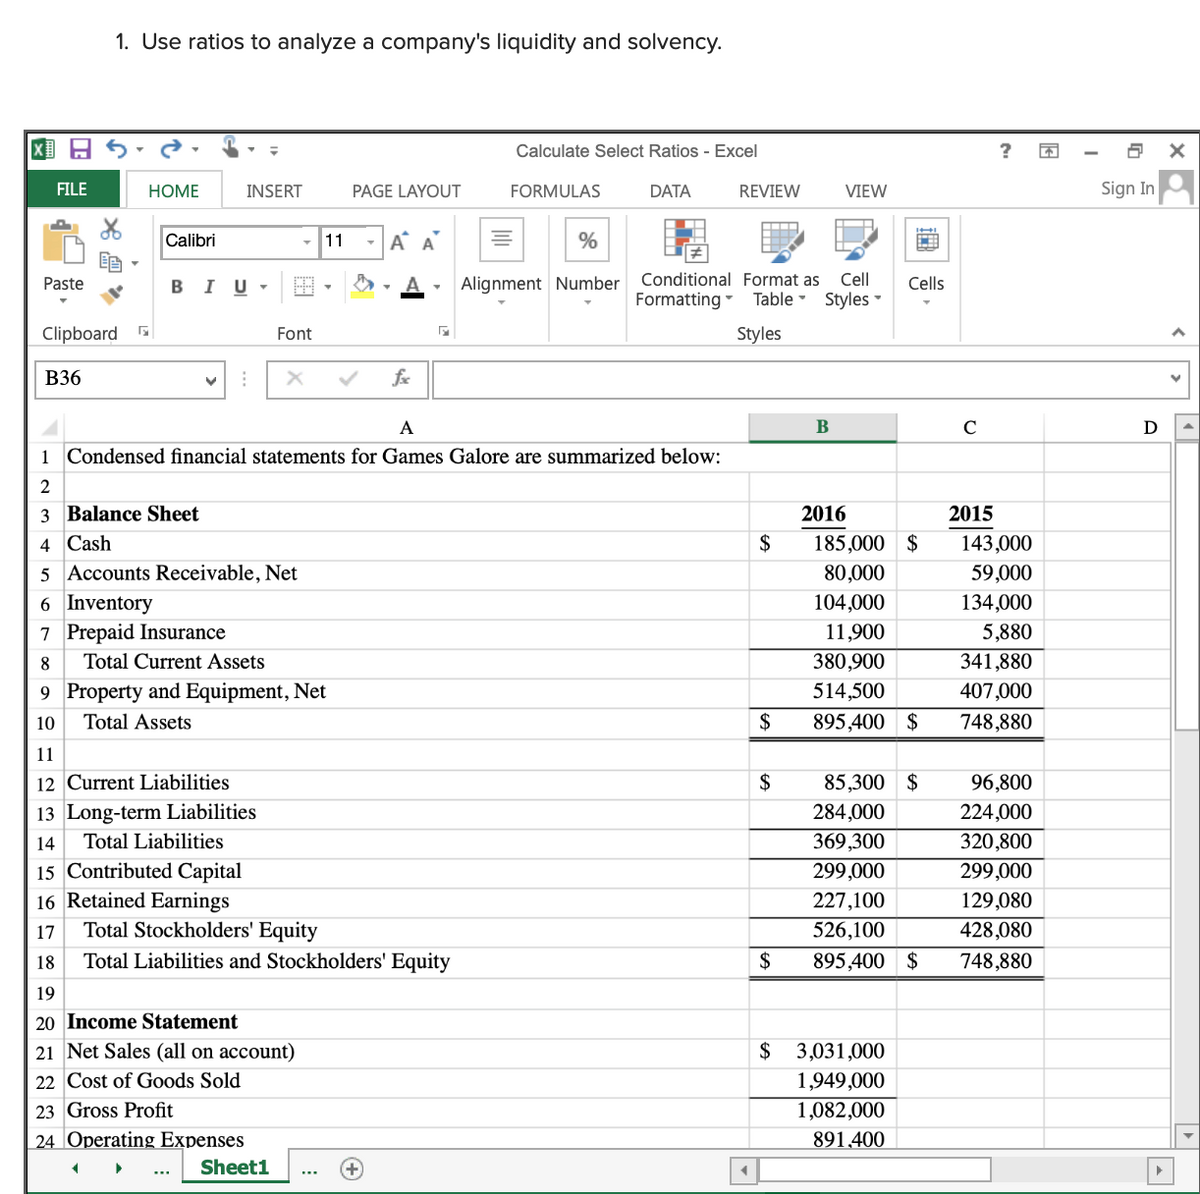 1. Use ratios to analyze a company's liquidity and solvency.
Calculate Select Ratios - Excel
FILE
НОМE
INSERT
PAGE LAYOUT
FORMULAS
DATA
REVIEW
VIEW
Sign In
Calibri
11
A A
%
Alignment Number Conditional Format as
Formatting - Table -
Paste
I
Cell
Cells
Styles -
Clipboard
Font
Styles
B36
fx
A
B
C
D
1 Condensed financial statements for Games Galore are summarized below:
2
3 Balance Sheet
2016
2015
185,000 $
80,000
4 Cash
$
143,000
59,000
134,000
5 Accounts Receivable, Net
6 Inventory
104,000
7 Prepaid Insurance
11,900
5,880
Total Current Assets
380,900
341,880
9 Property and Equipment, Net
514,500
407,000
10
Total Assets
$
895,400 $
748,880
11
12 Current Liabilities
2$
85,300 $
96,800
13 Long-term Liabilities
284,000
224,000
Total Liabilities
369,300
299,000
320,800
299,000
14
15 Contributed Capital
16 Retained Earnings
Total Stockholders' Equity
227,100
129,080
428,080
17
526,100
18
Total Liabilities and Stockholders' Equity
$
895,400 $
748,880
19
20 Income Statement
$ 3,031,000
1,949,000
1,082,000
21 Net Sales (all on account)
22 Cost of Goods Sold
23 Gross Profit
24 Operating Expenses
891,400
Sheet1
